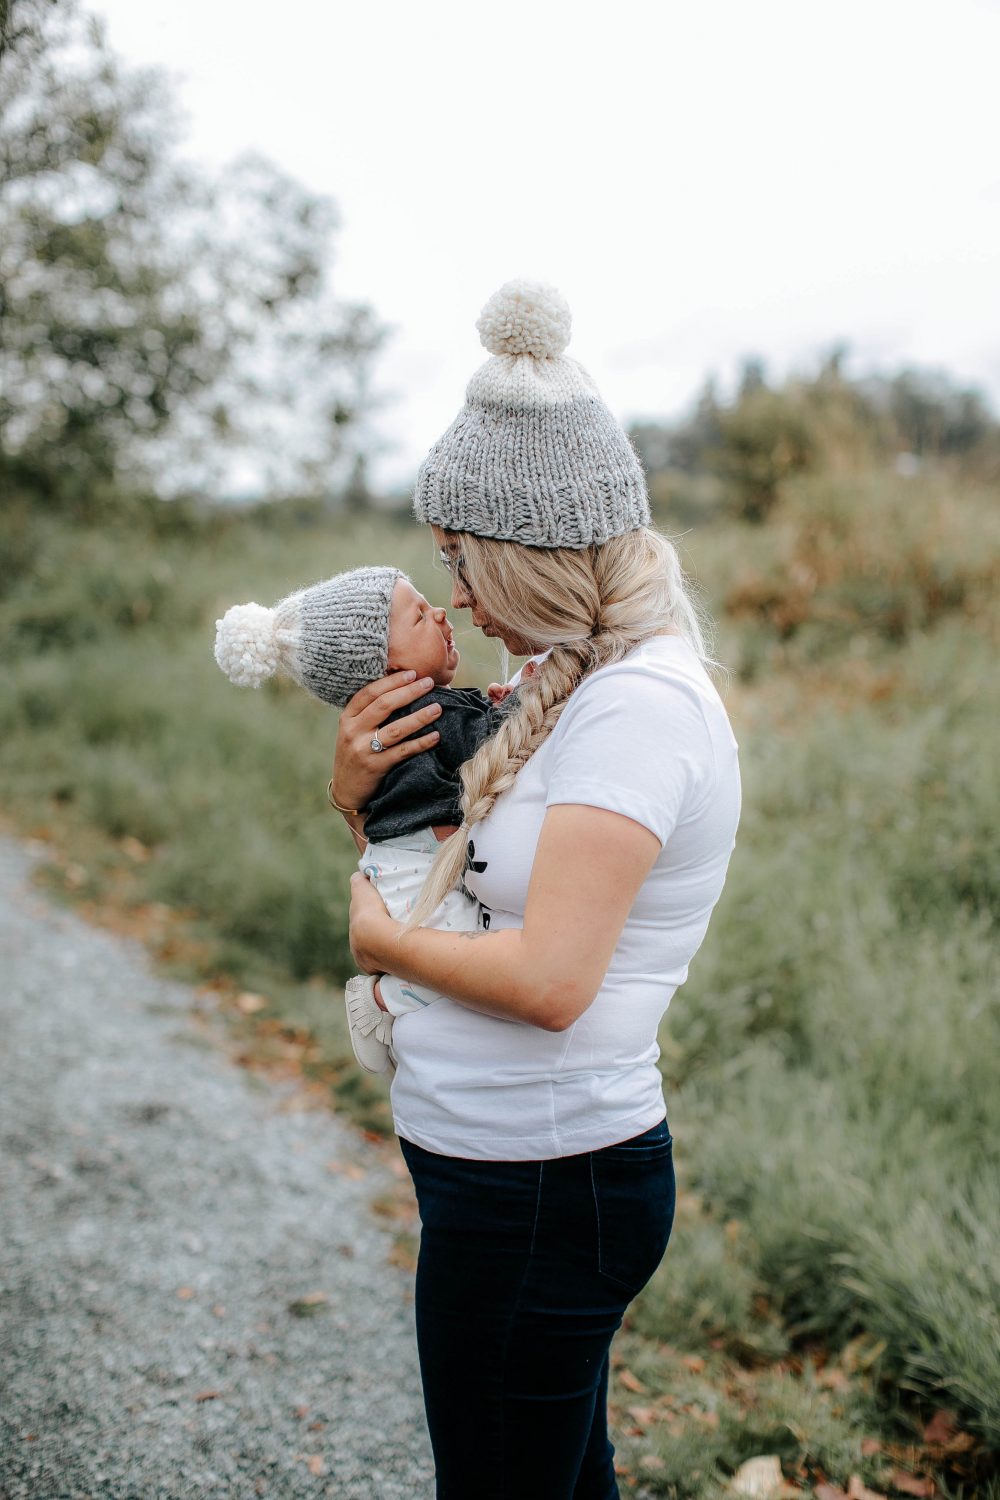 Mother and Daughter in matching toques #fall #knitted #fashion